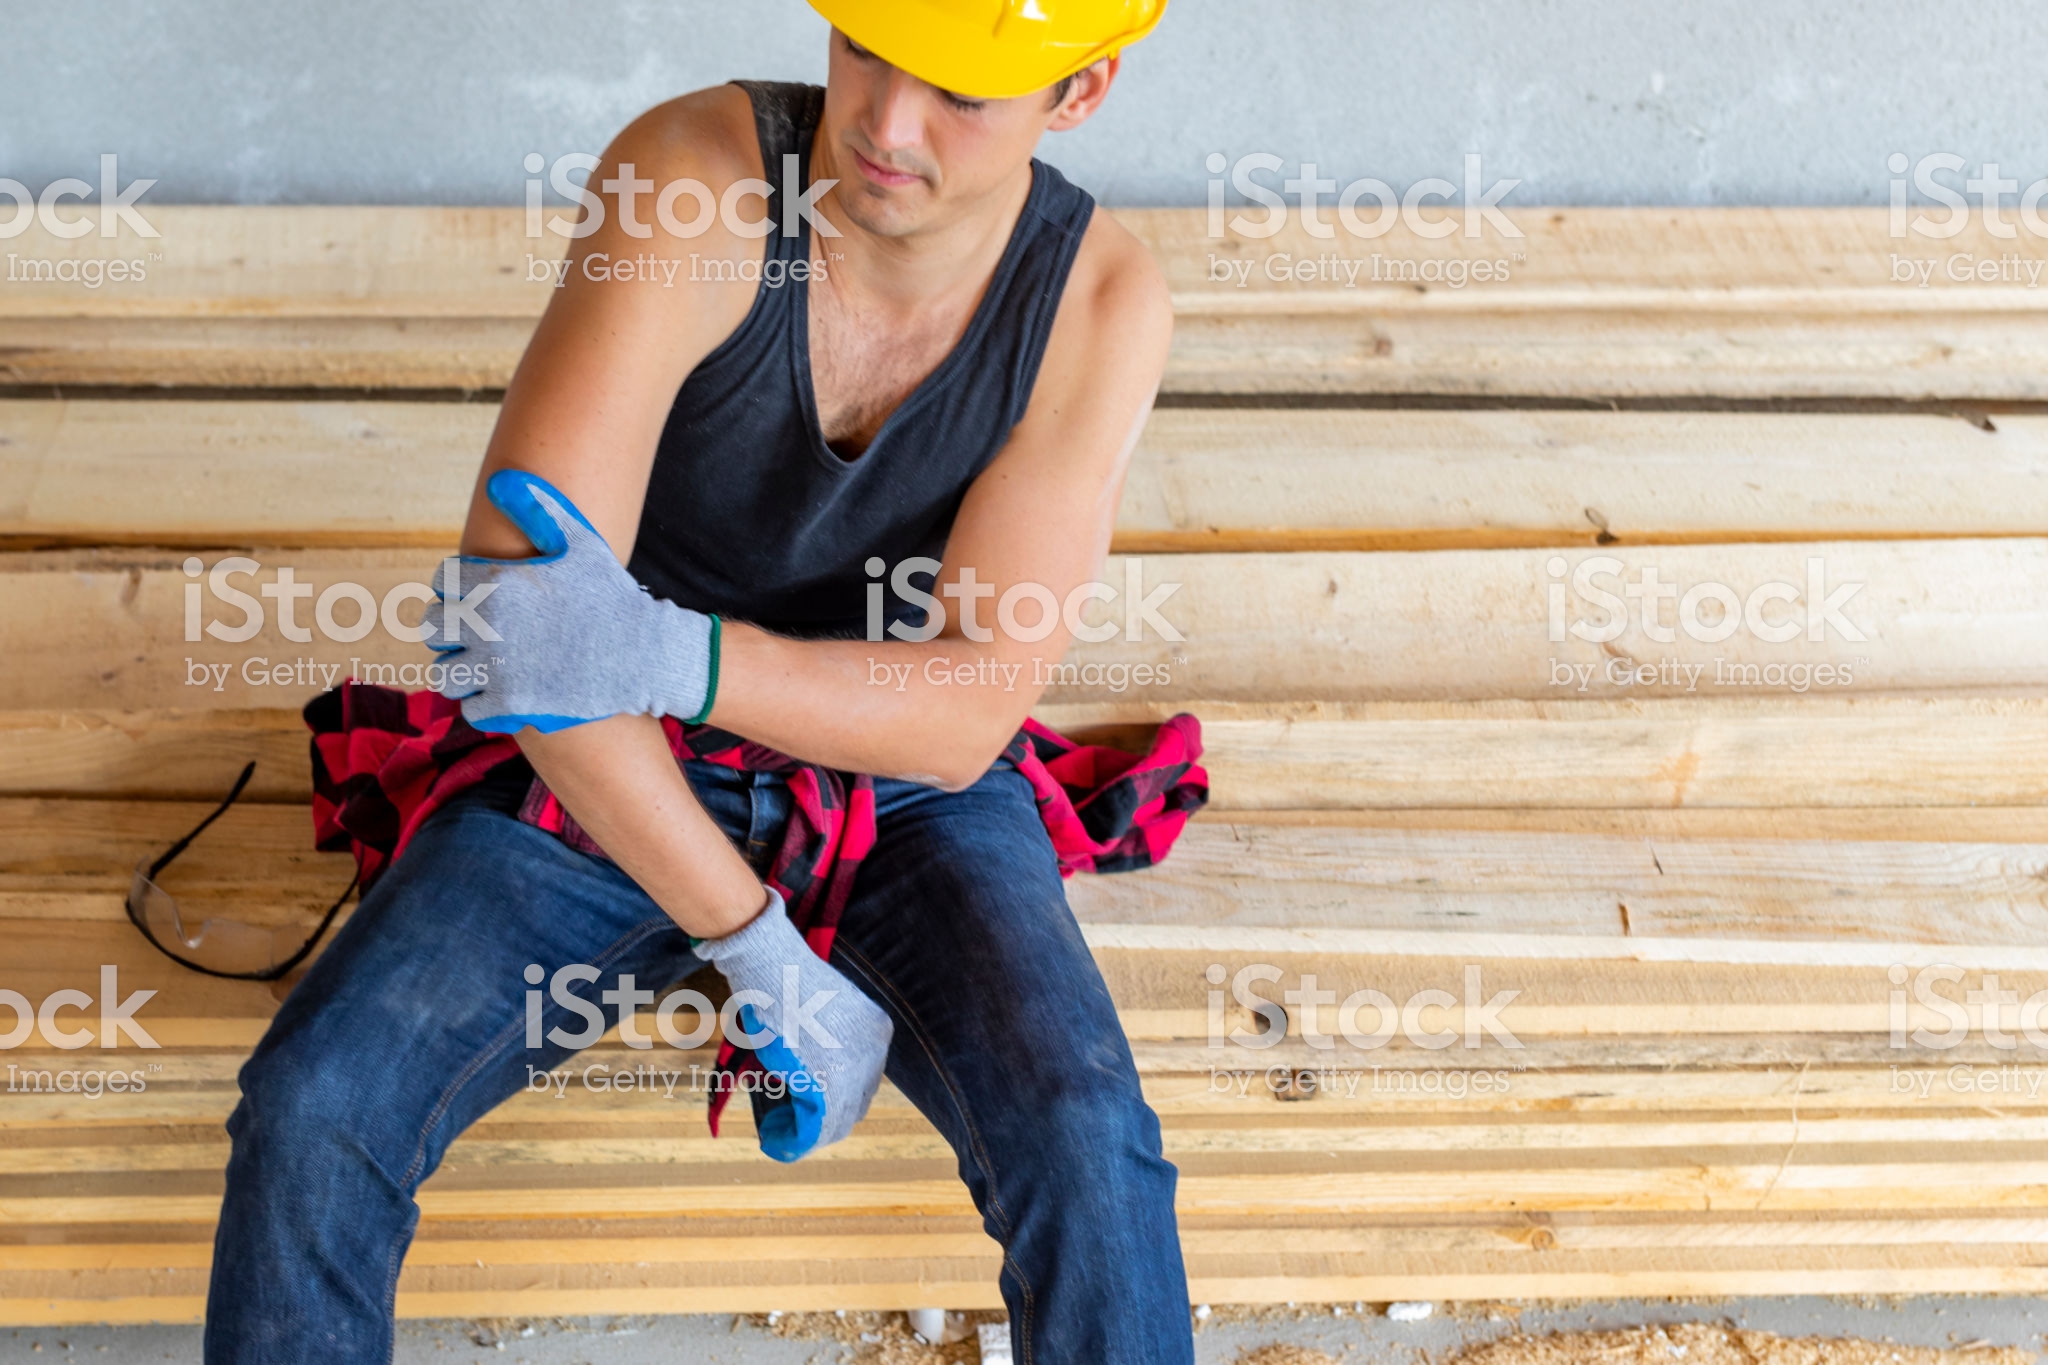 construction worker injury lawyer